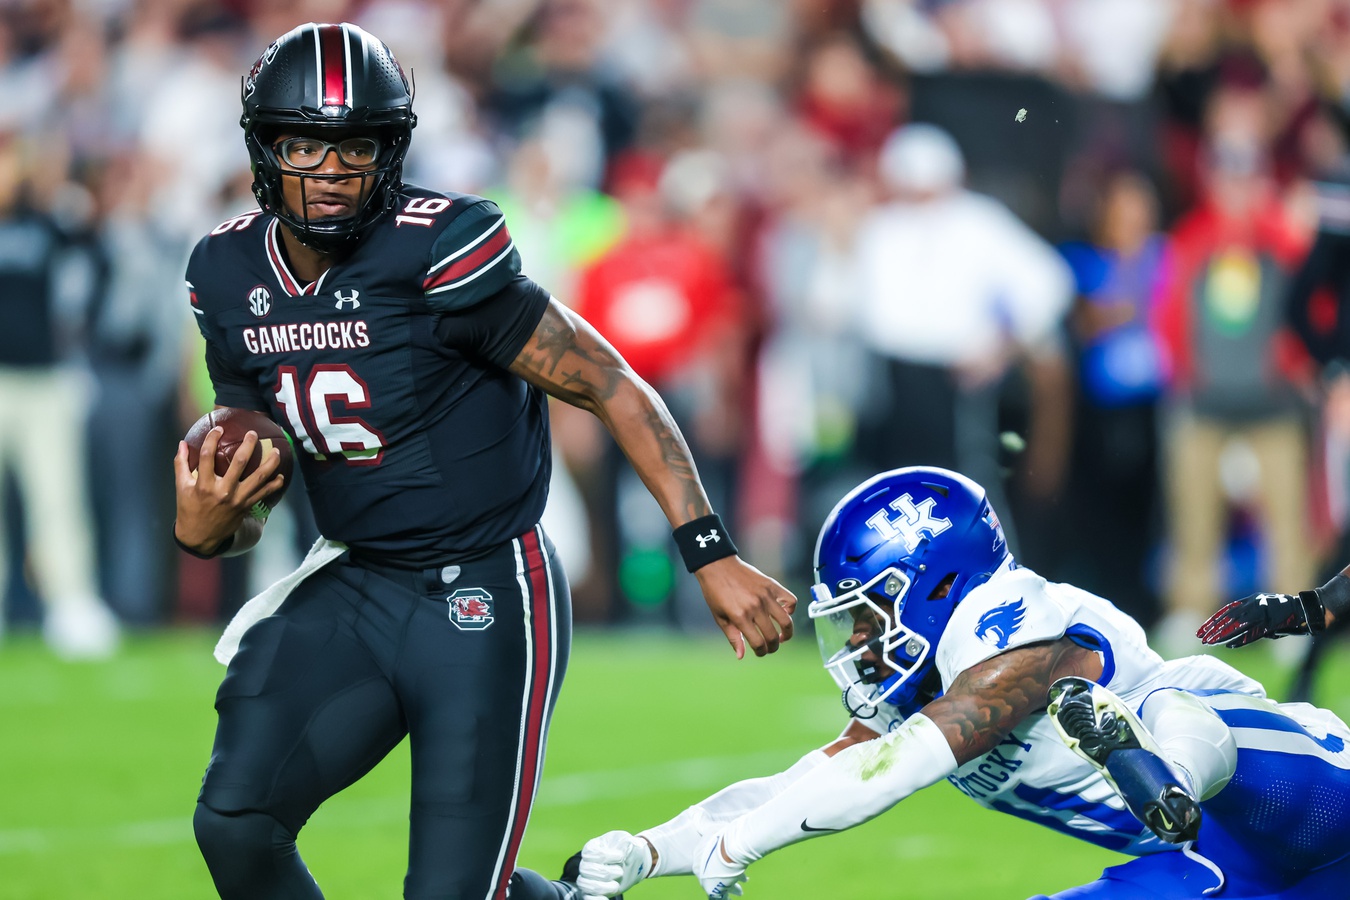 South Carolina faces a matchup with rival Clemson on Saturday. Some surprise players could be difference makers for the Gamecocks.